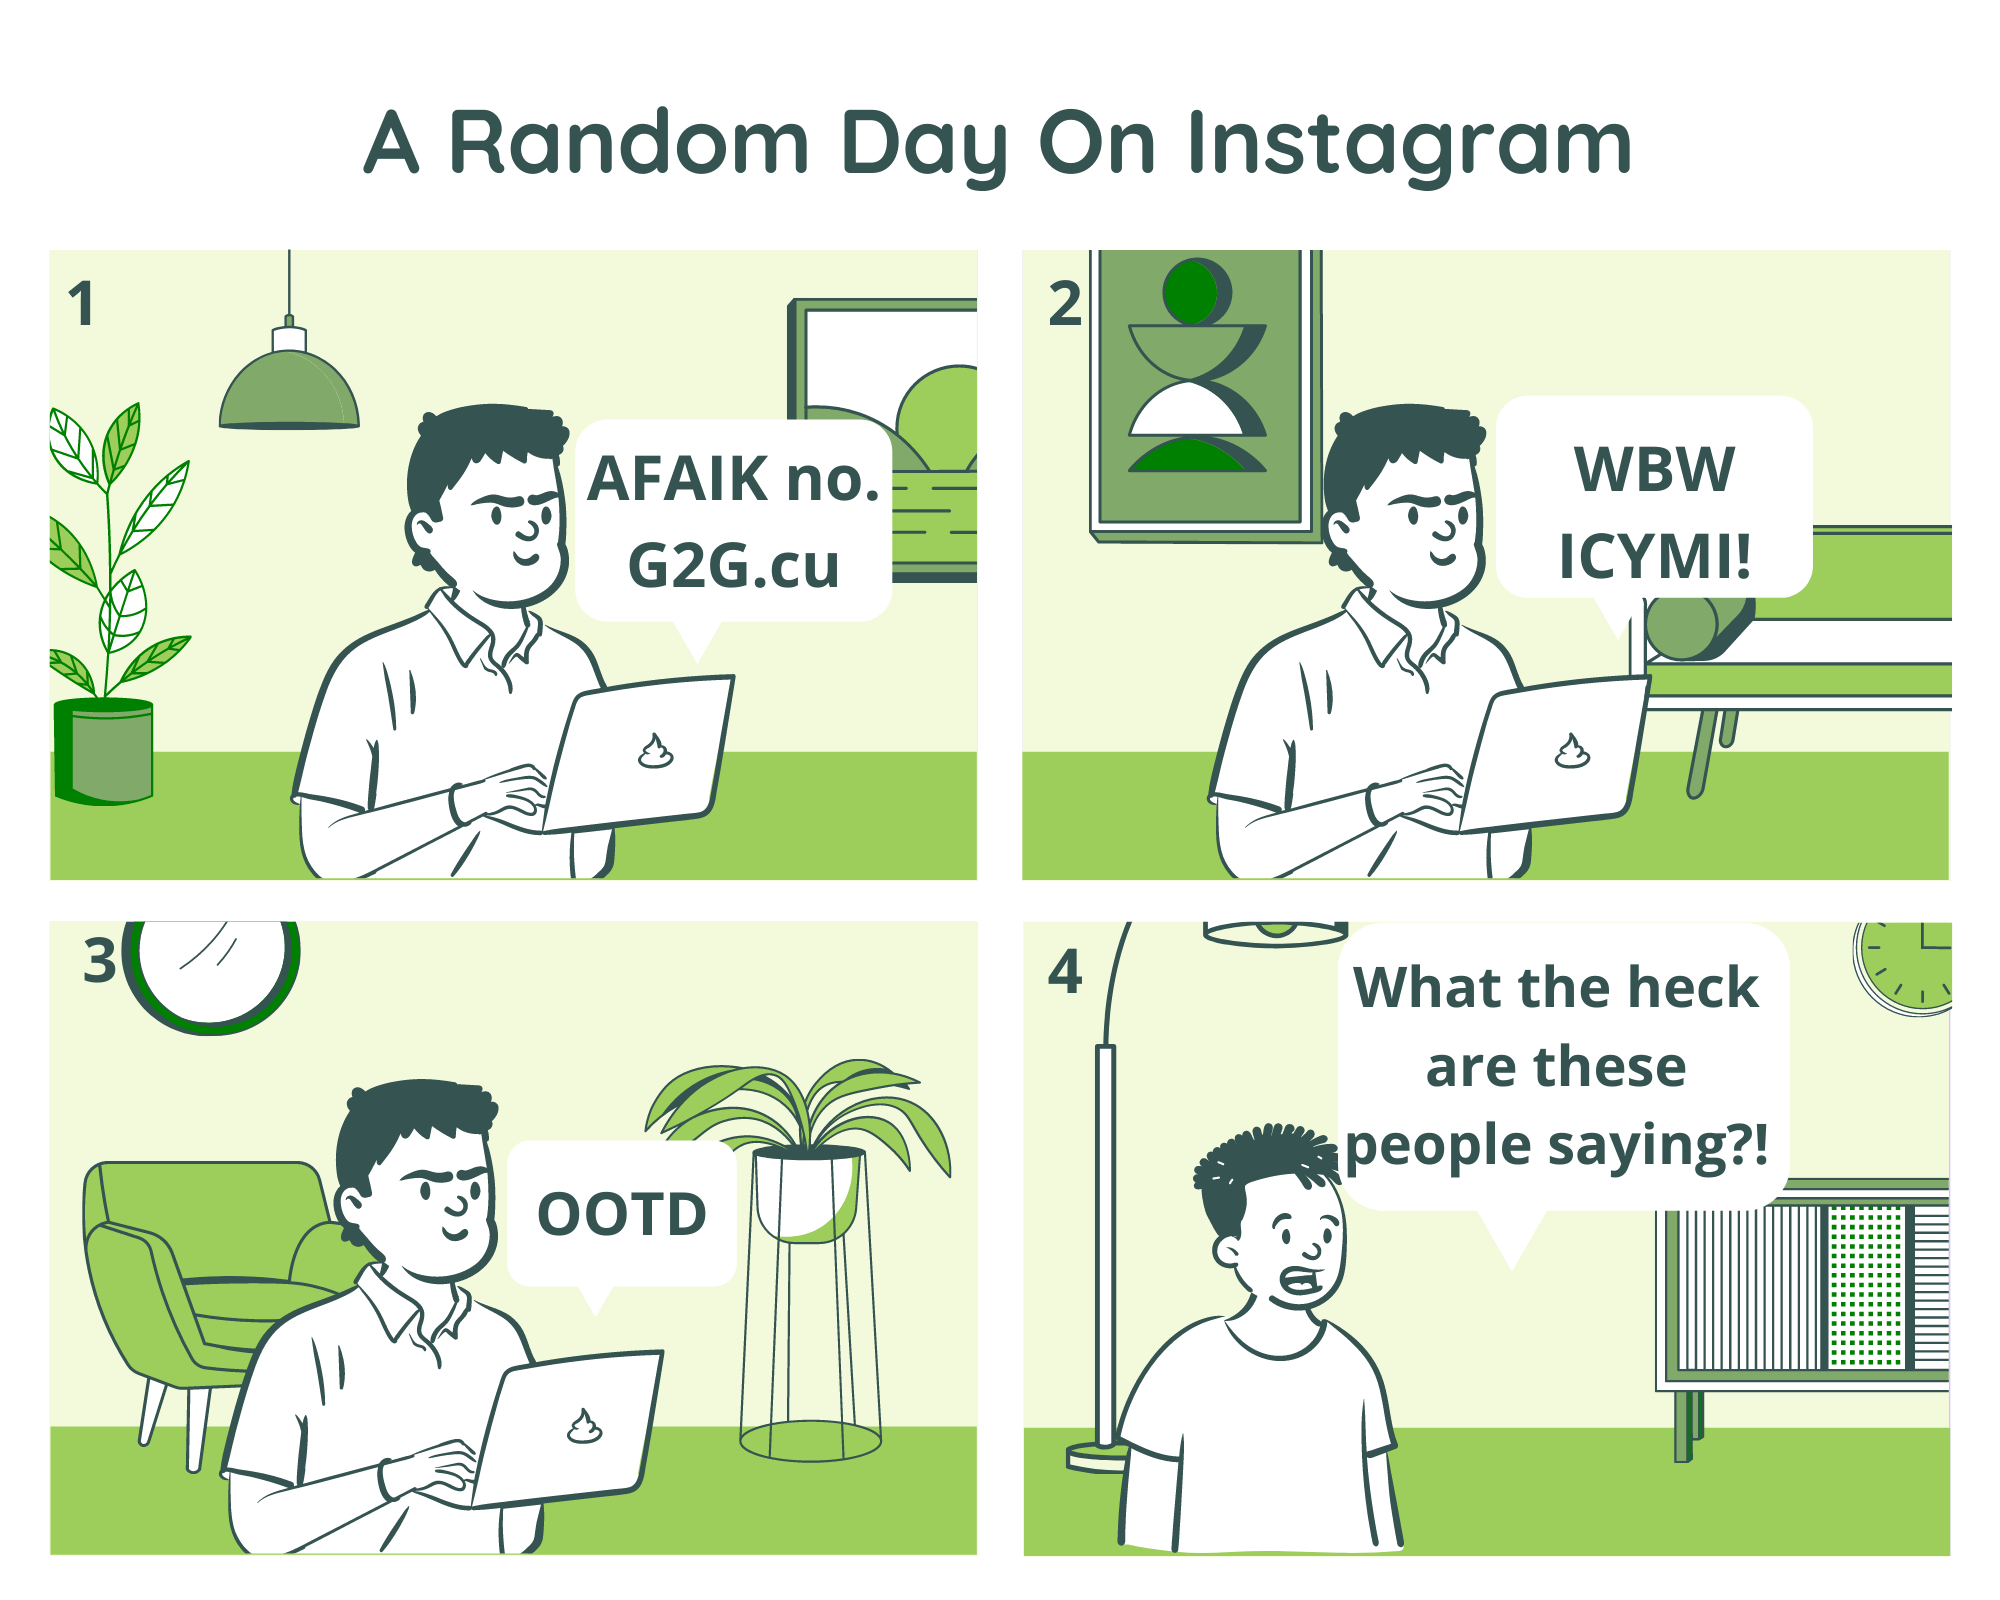 A comic in which a guy doesn't follow Instagram lingo